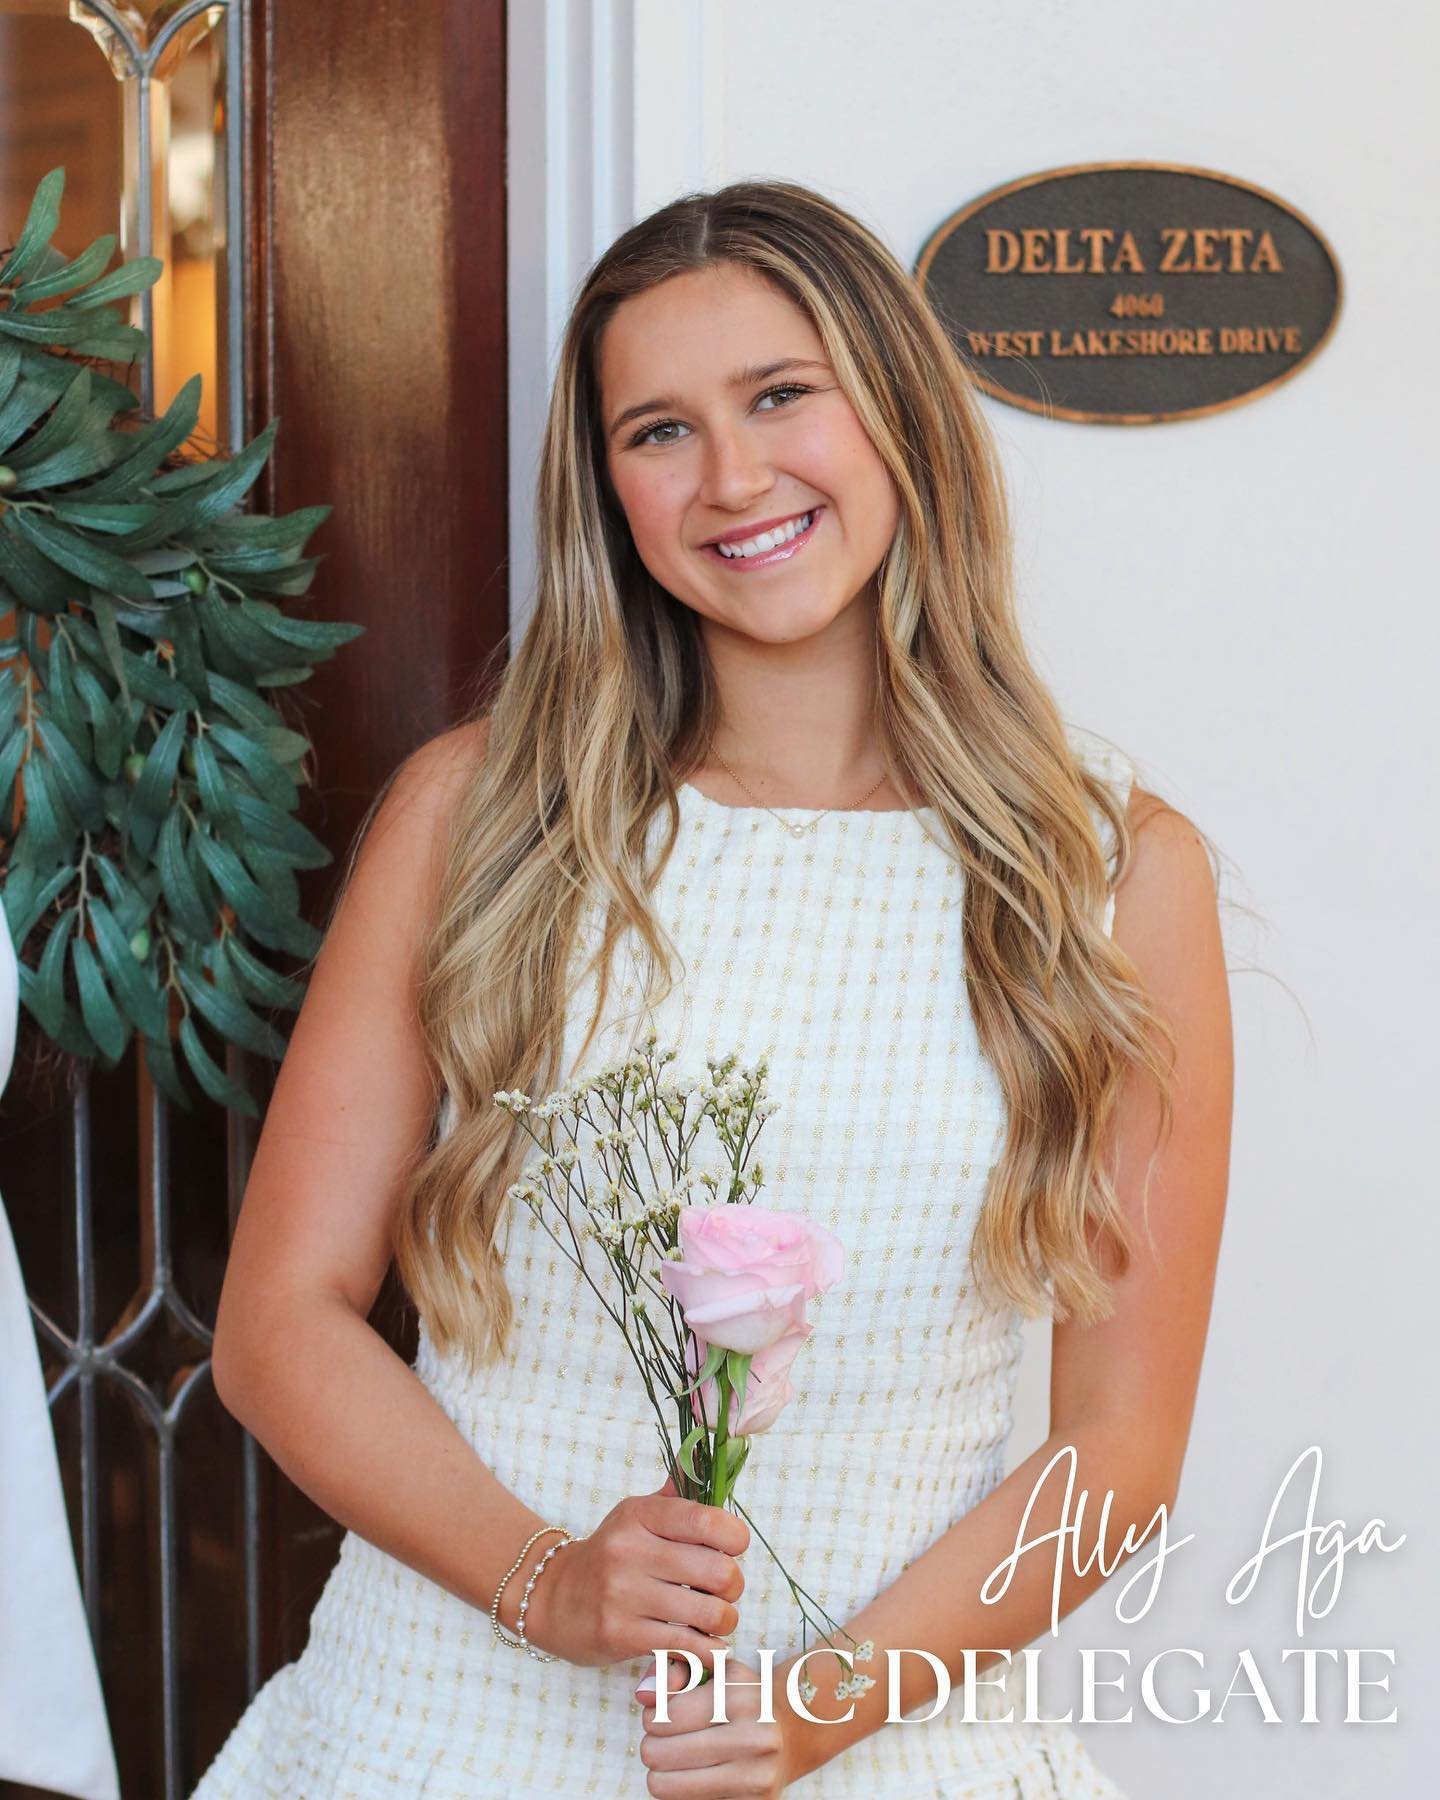 Meet our PHC Delegate, Ally Aga!💐 #MEETEXECMONDAY 

Hometown: Seabrook, TX
Major: Management- Strategic Leadership
Ally 🩷&rsquo;s: her friends, dogs, sushi, working out, traveling 
Fun fact: I did competitive cheer for 10 years, and was on the high